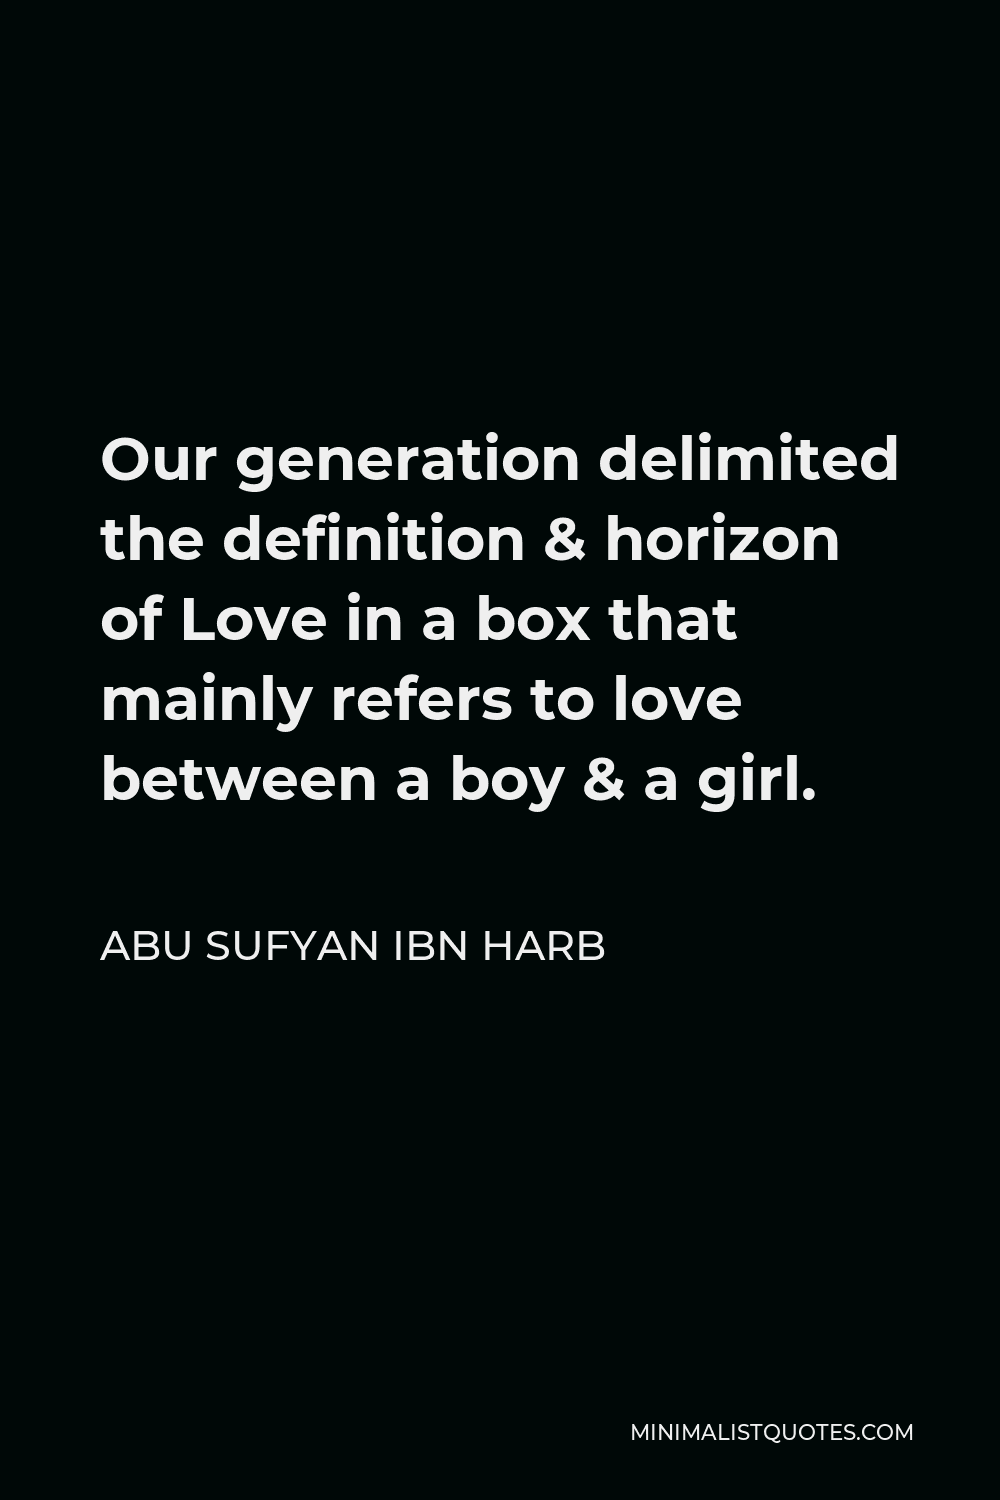 Abu Sufyan ibn Harb Quote - Our generation delimited the definition & horizon of Love in a box that mainly refers to love between a boy & a girl.